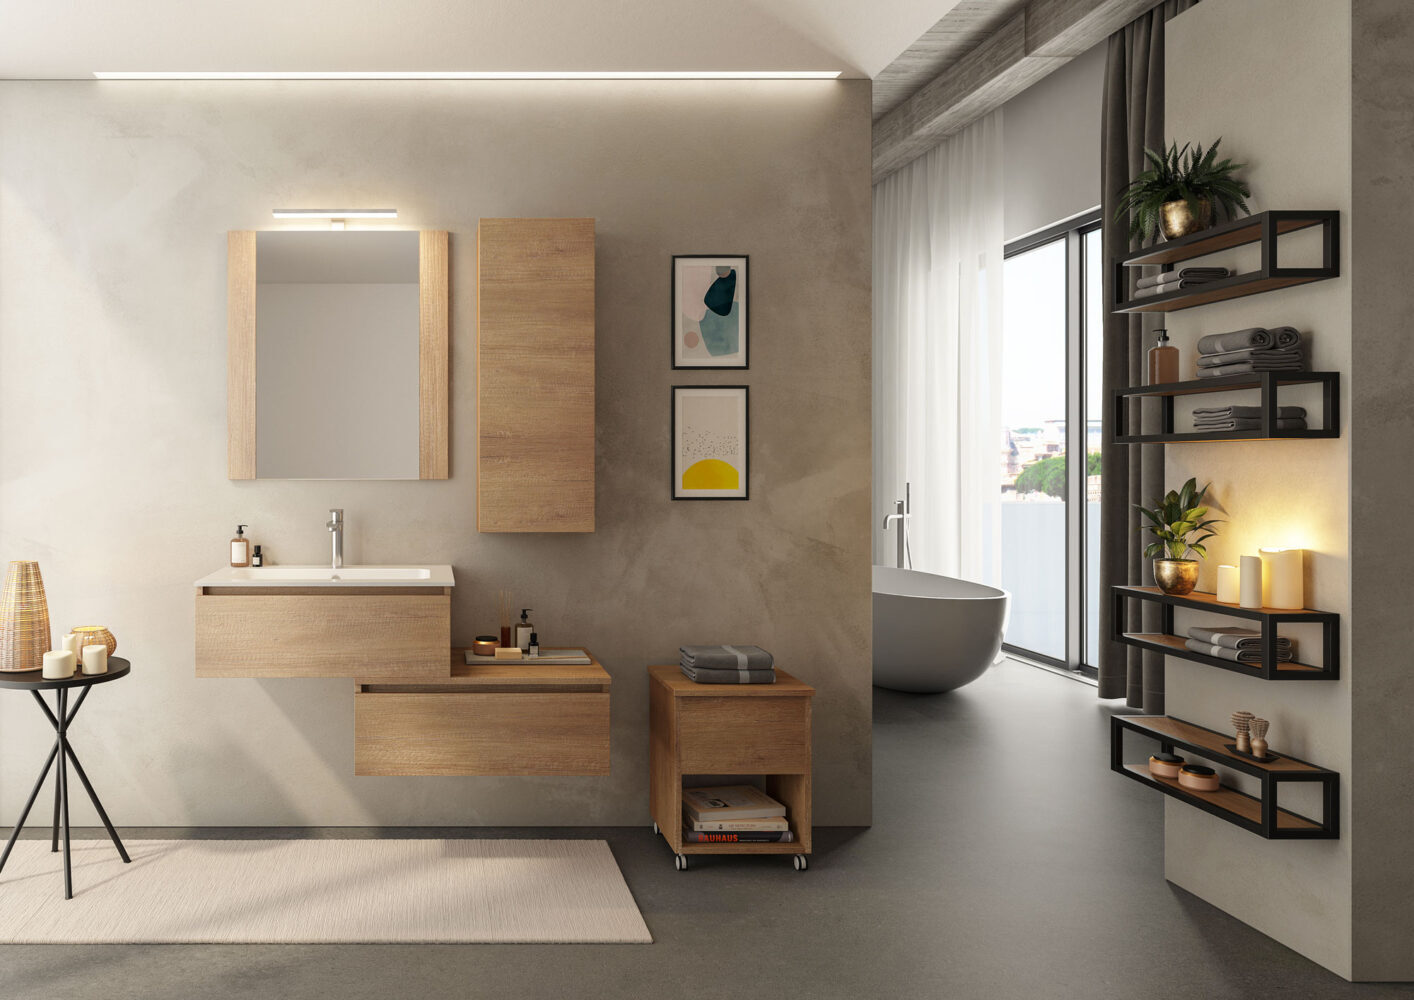 Urban Componibile collection modern bathroom furniture